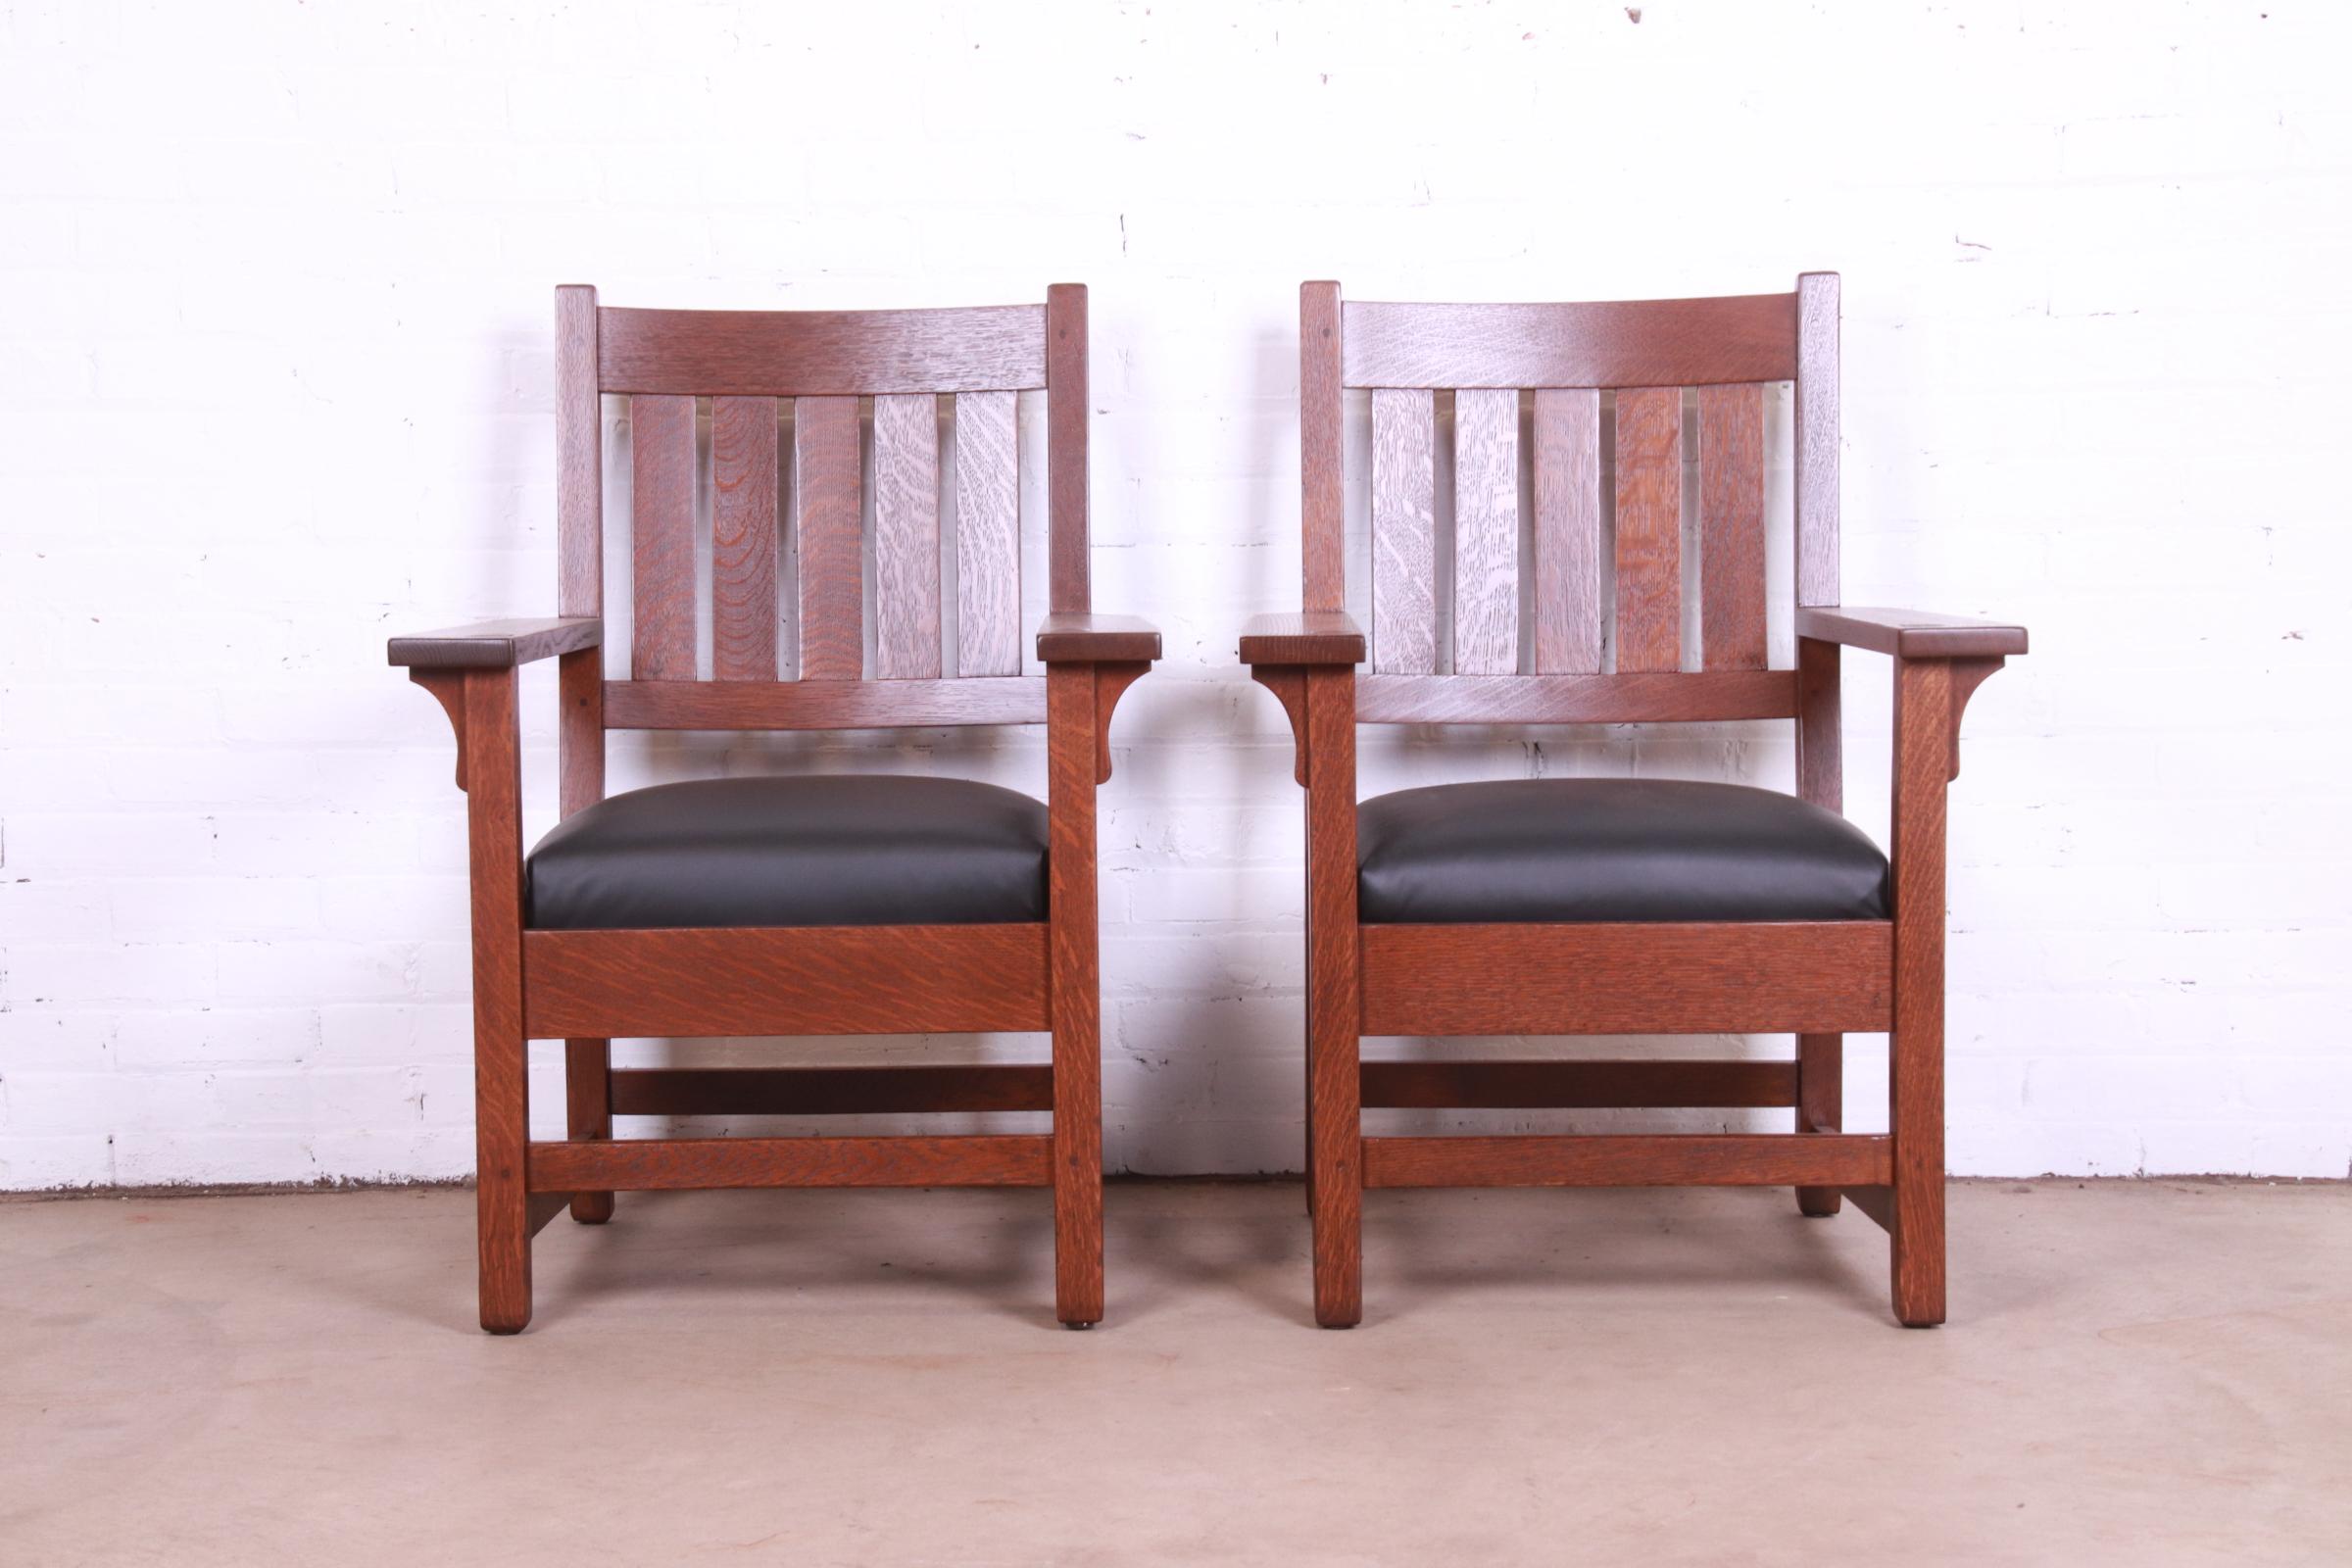 American Gustav Stickley Mission Oak Arts & Crafts Lounge Chairs, Fully Restored